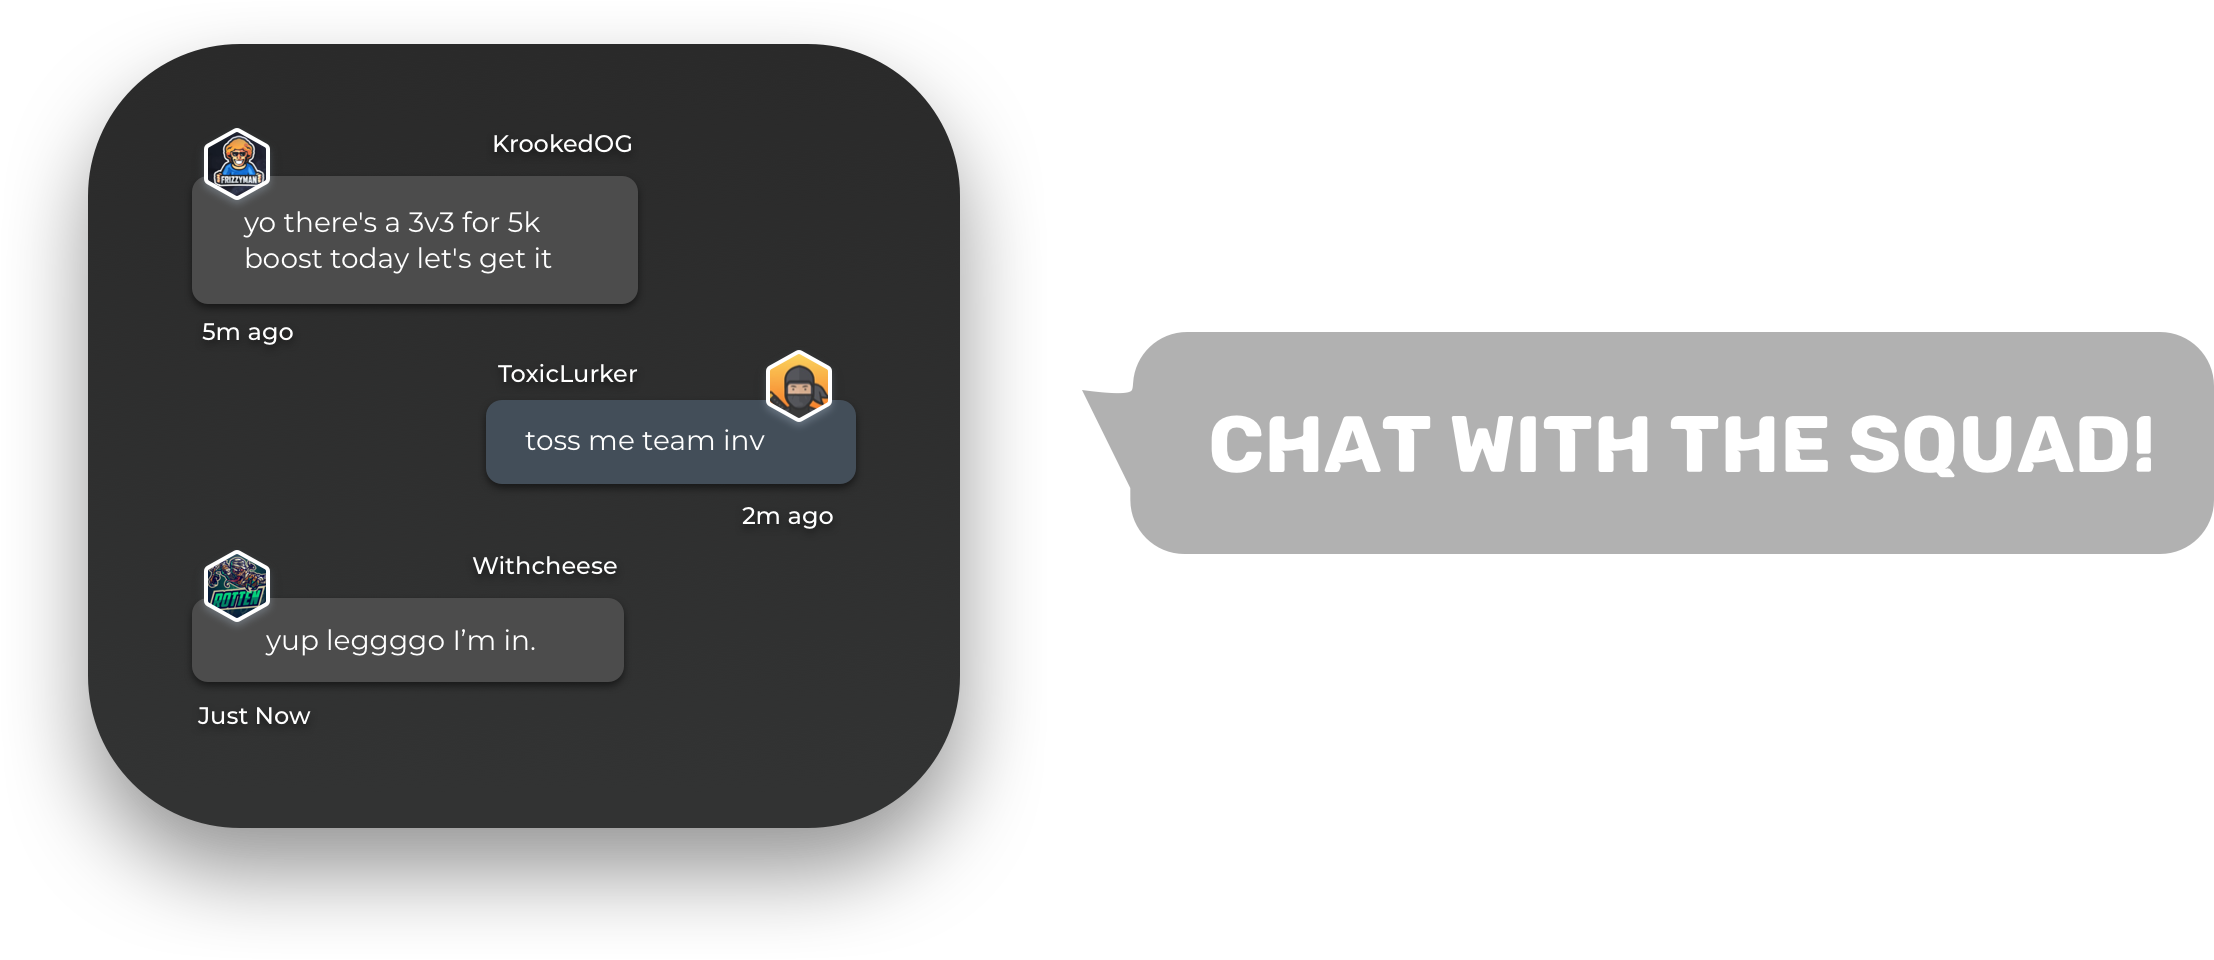 Teams on Gizer can chat seamlessly with each other in app. Find tournaments to comepete in with your friends